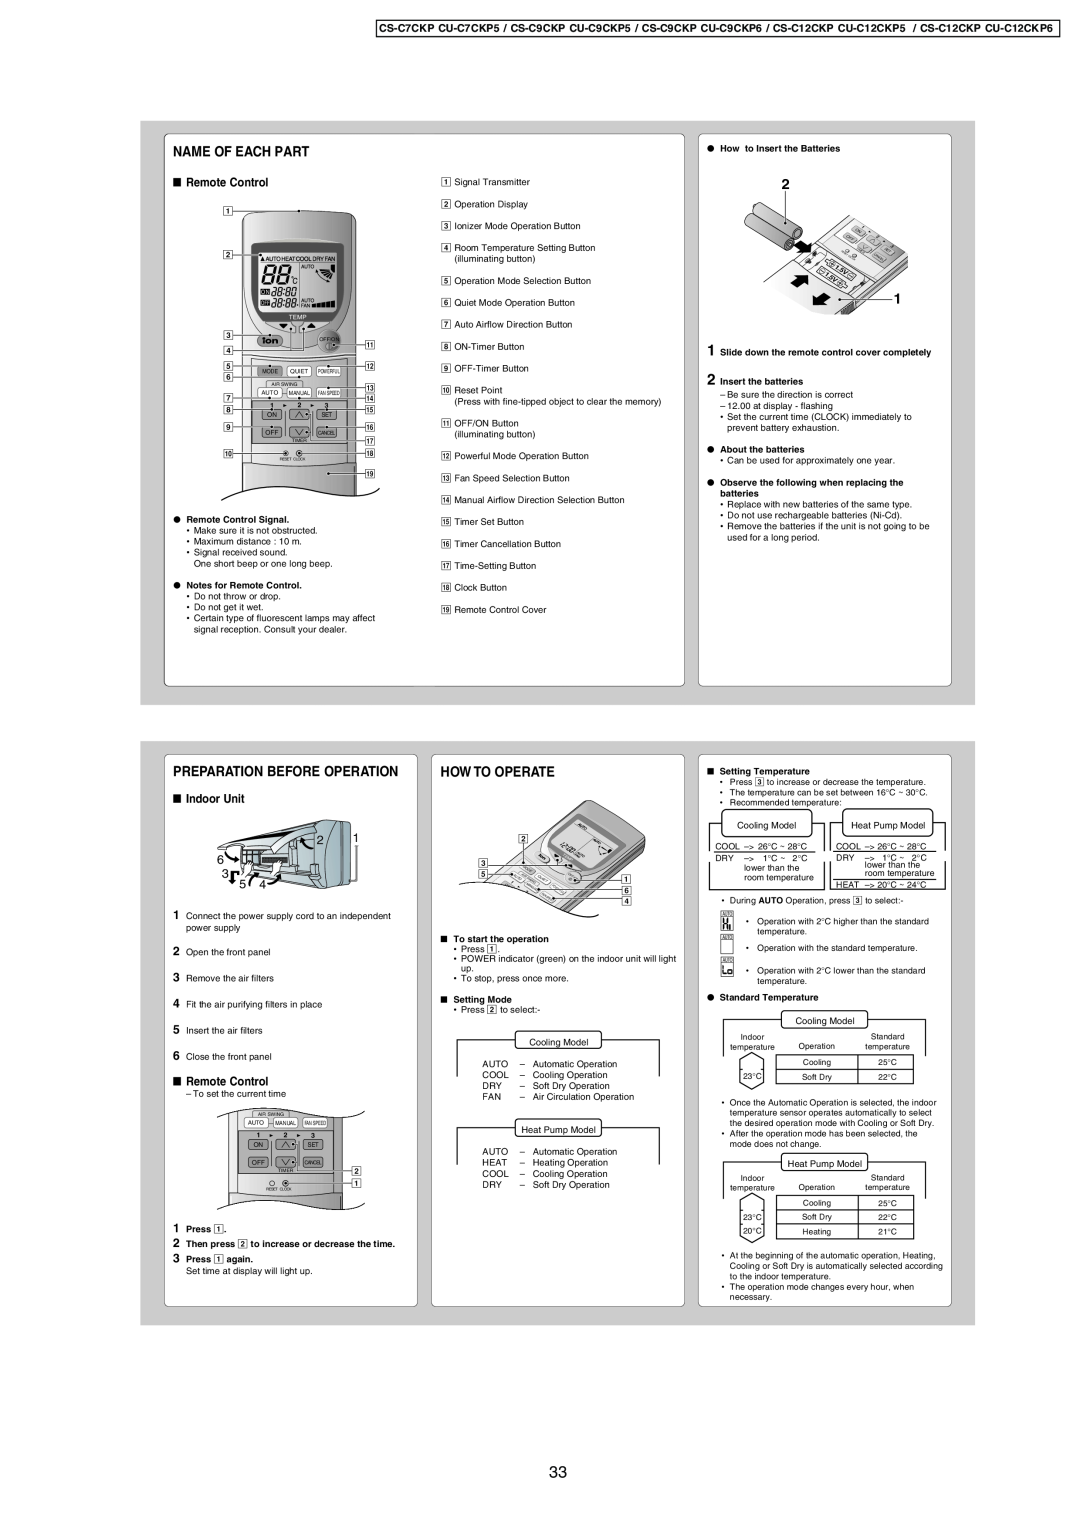 Panasonic CU-C12CKP5 manual Name Of Each Part, Preparation Before Operation, Remote Control, How To Operate, Indoor Unit 